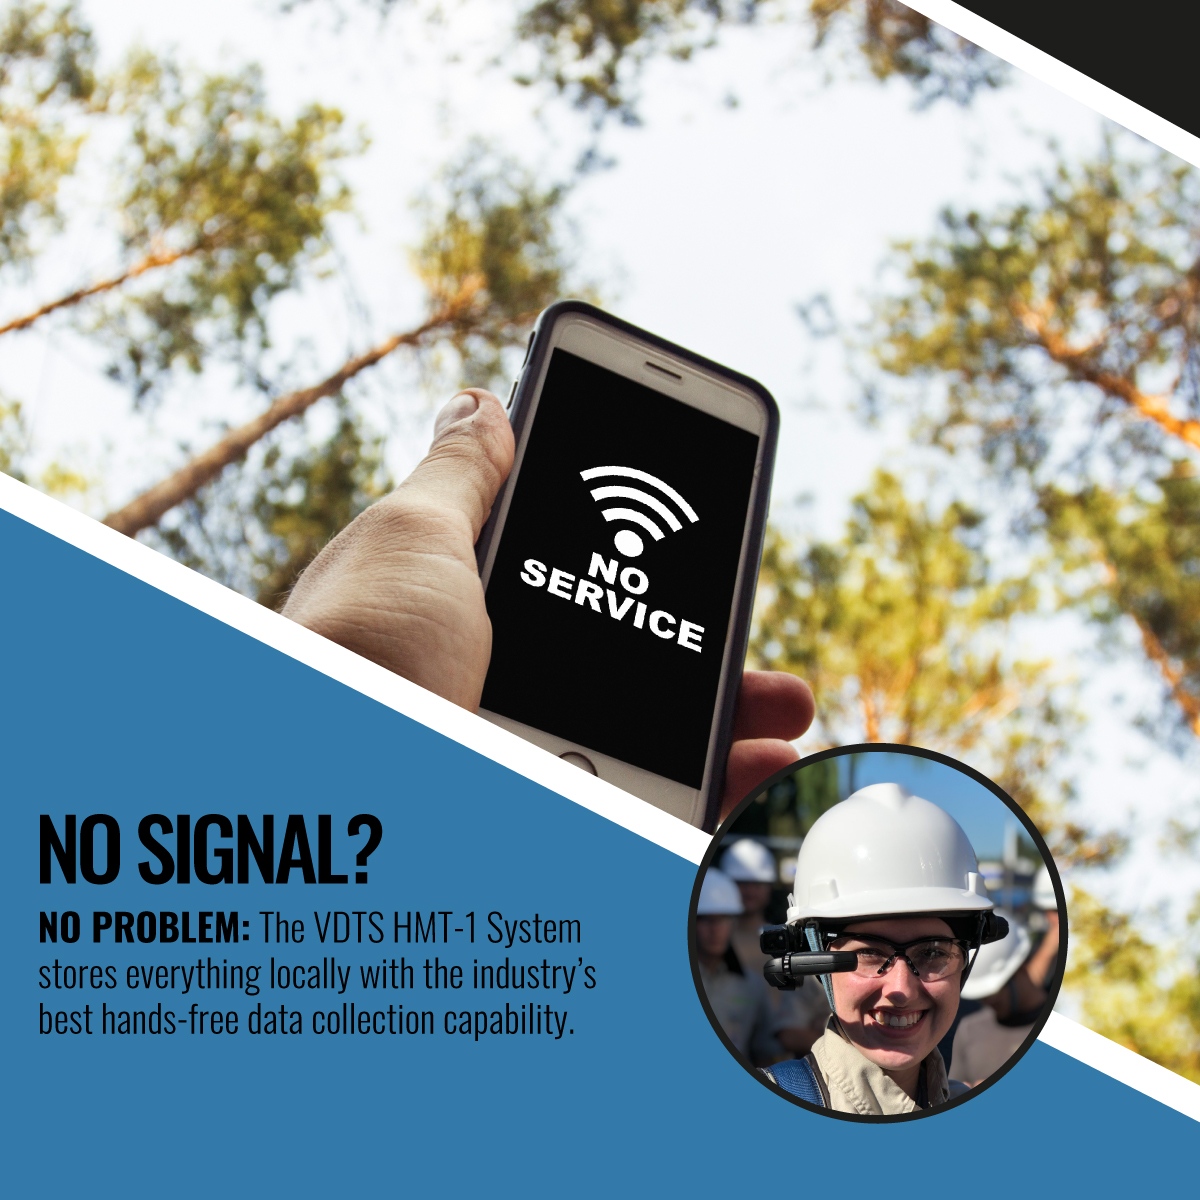 No Signal?  No Problem!

The VDTS System and Realwear Navigator™ 500 stores everything locally. Learn: bit.ly/3RLnLen

#Freeyourhands #AssistedReality #datacollection #handsfree #voicetechnology #realwear #wearabletechnology